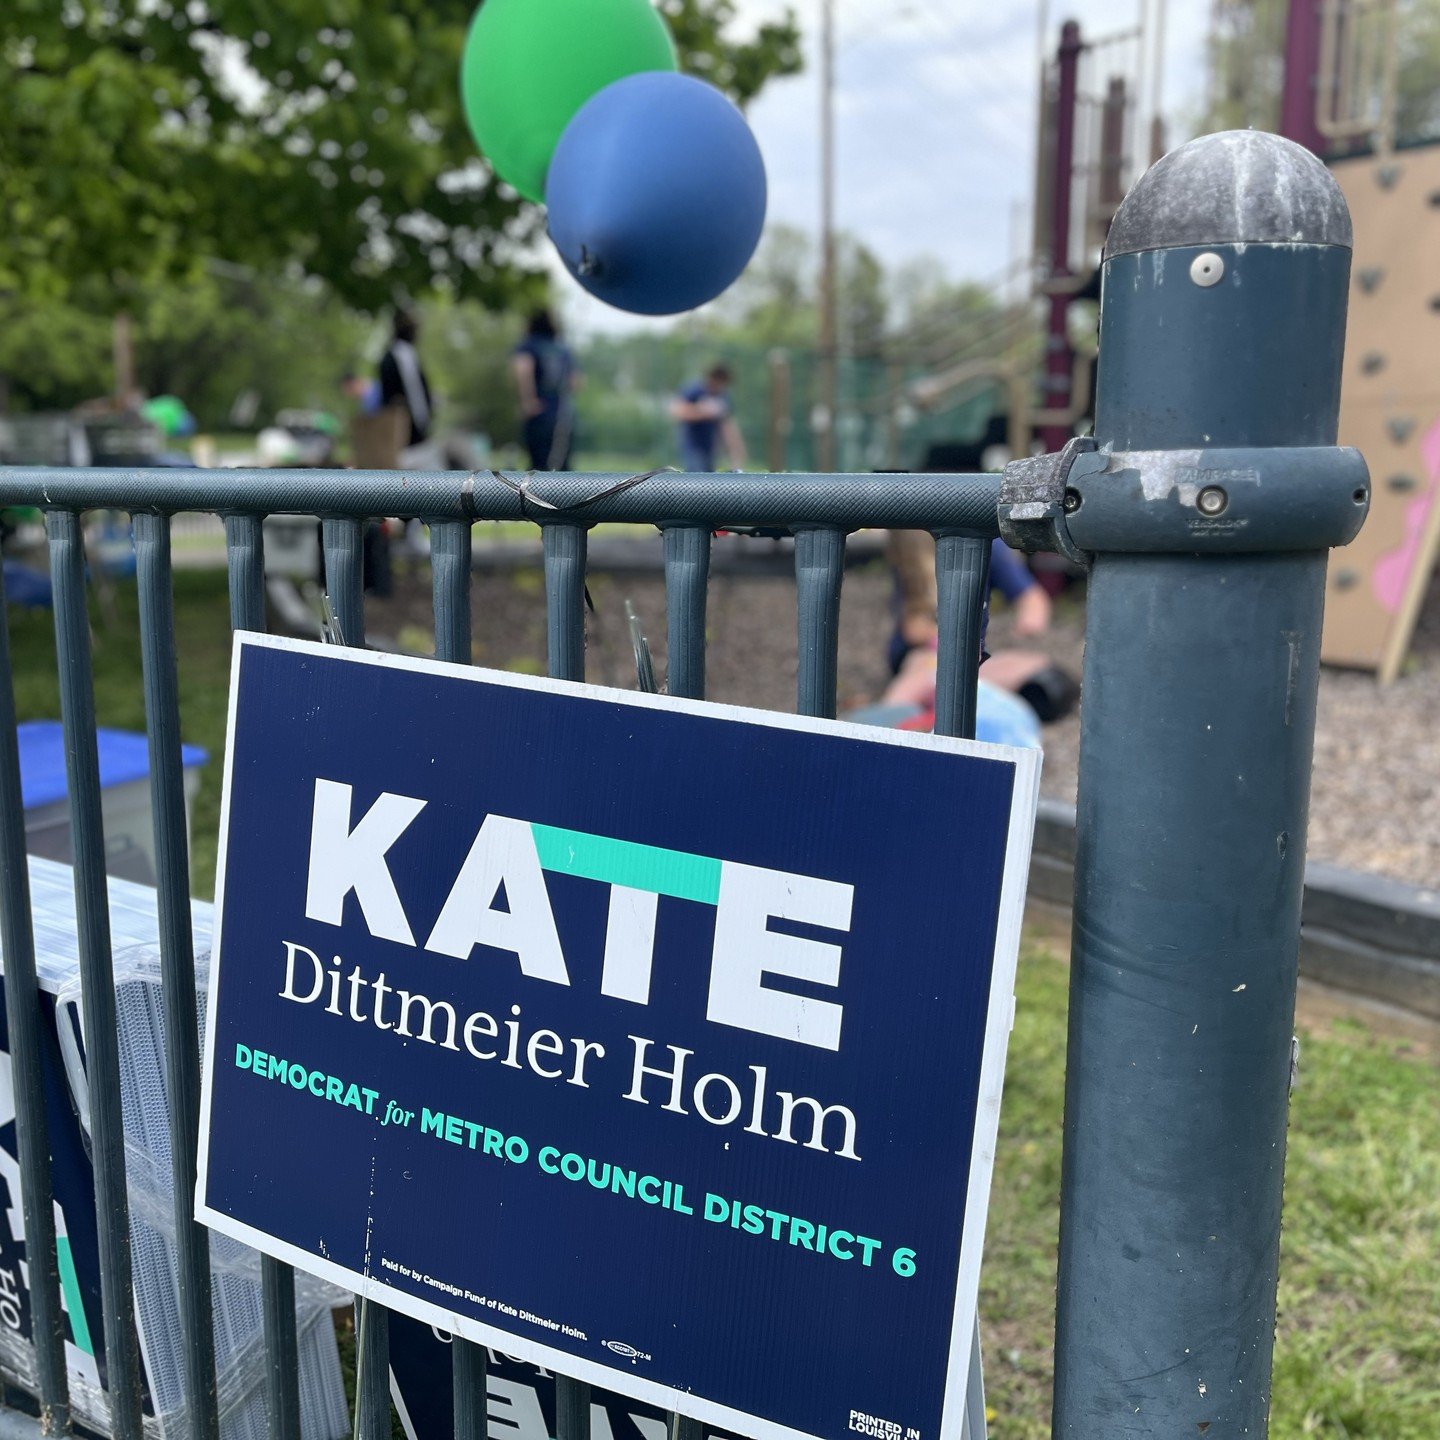 We enjoyed food, conversation, and fun with friends and neighbors at our first Cookout with Kate in Park Hill this weekend. Join us for more community building next Sunday in Central Park.

#wearedistrict6 
#community